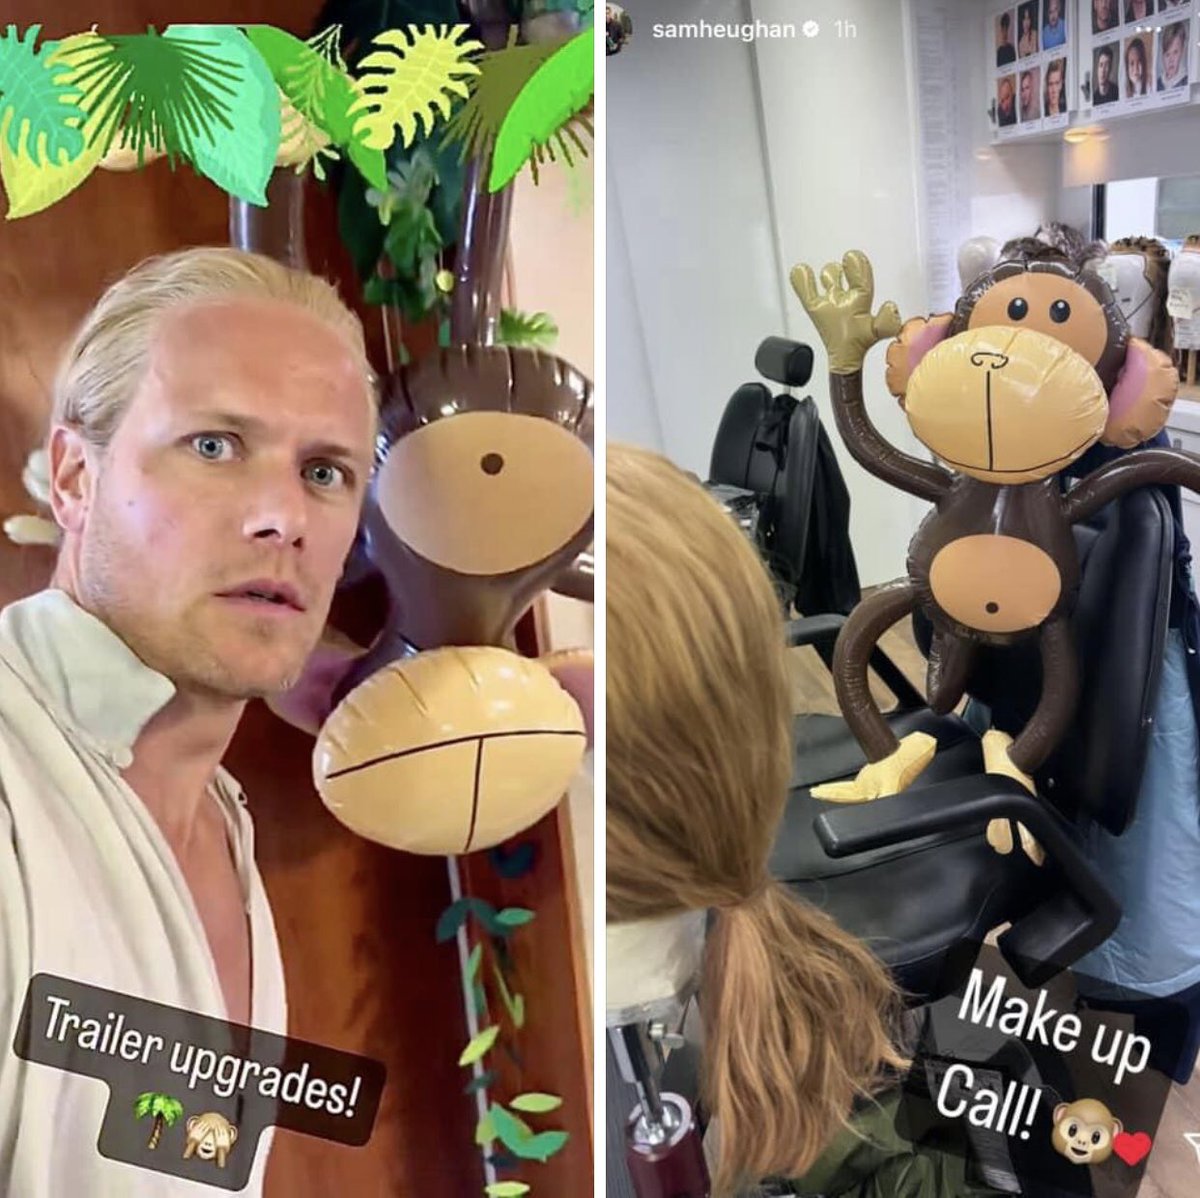 Love this weekend vibe🐒❤️😘 GO WILD it’s Friday! @SamHeughan IGS/Instagram #SamHeughan